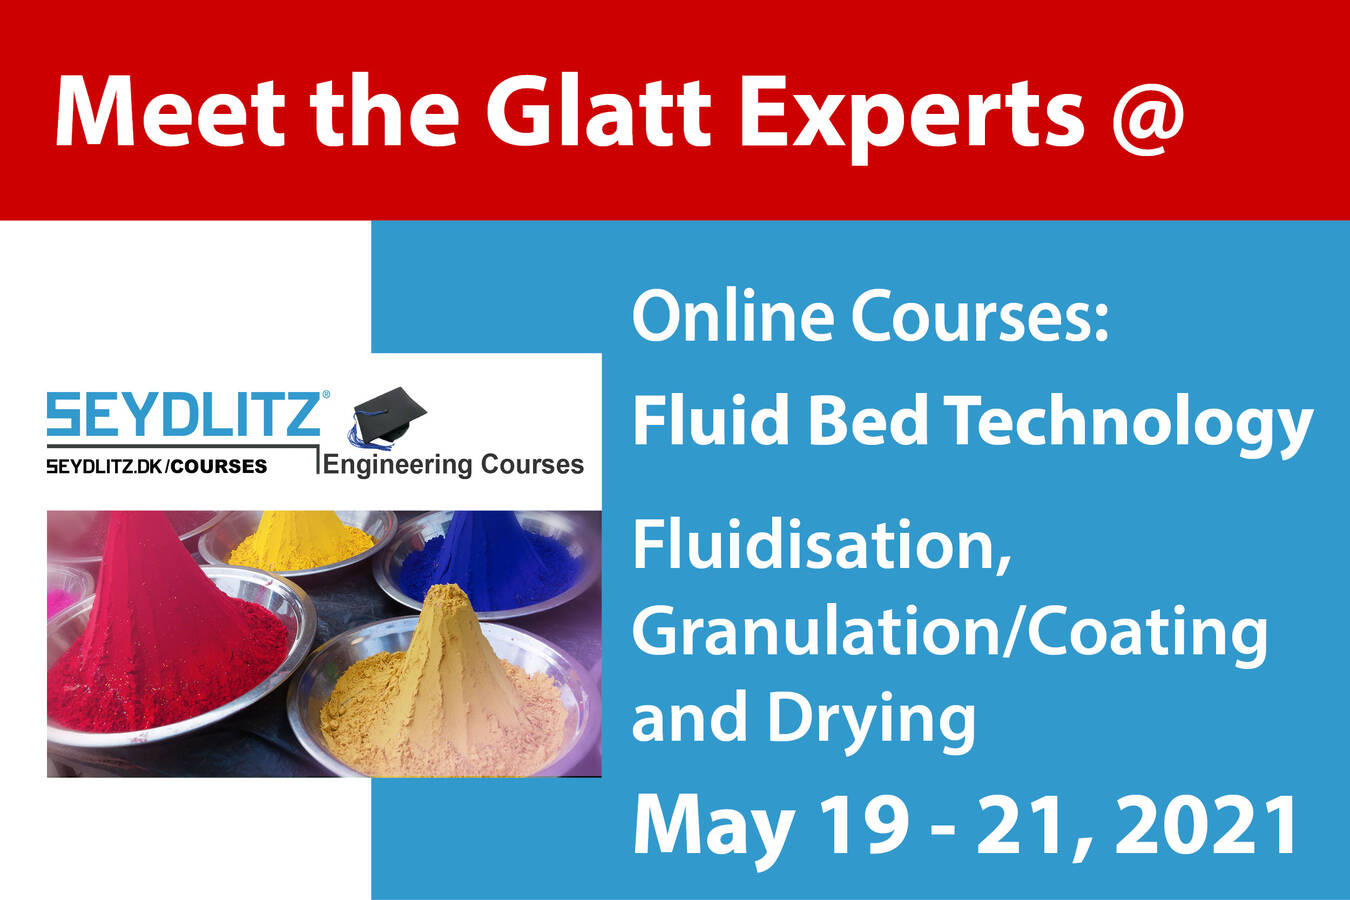 Course Fluid Beds: Fluidization, Granulation/Coating and Drying Meet the Glatt experts in an online course about Fluidized Bed Technology, from May 19 - 21, 2021. Part of the Seydlitz Engineering Courses